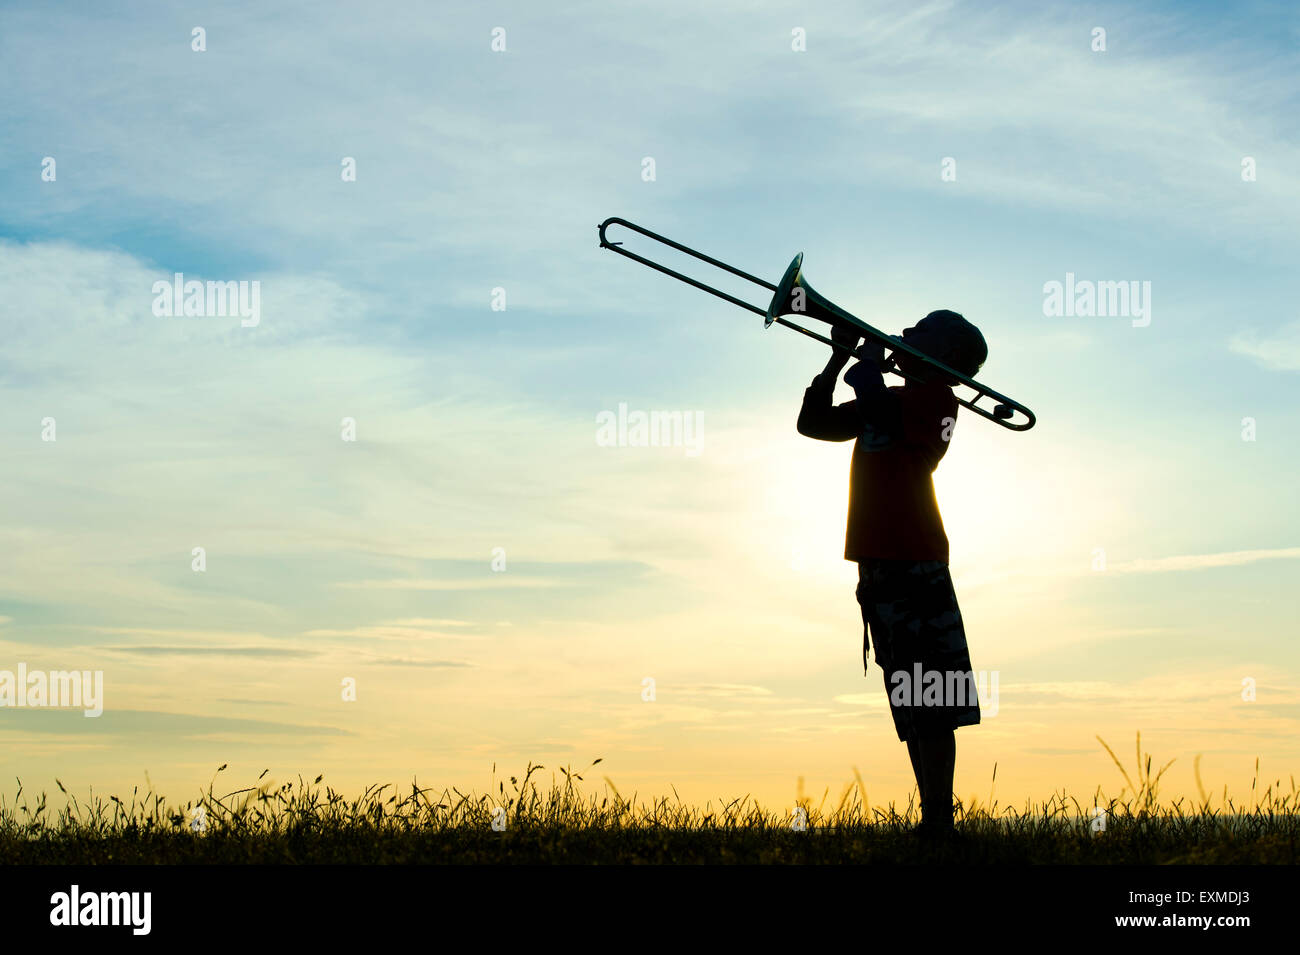 Silhouette of young boy playing a trombone against a sunset background Stock Photo